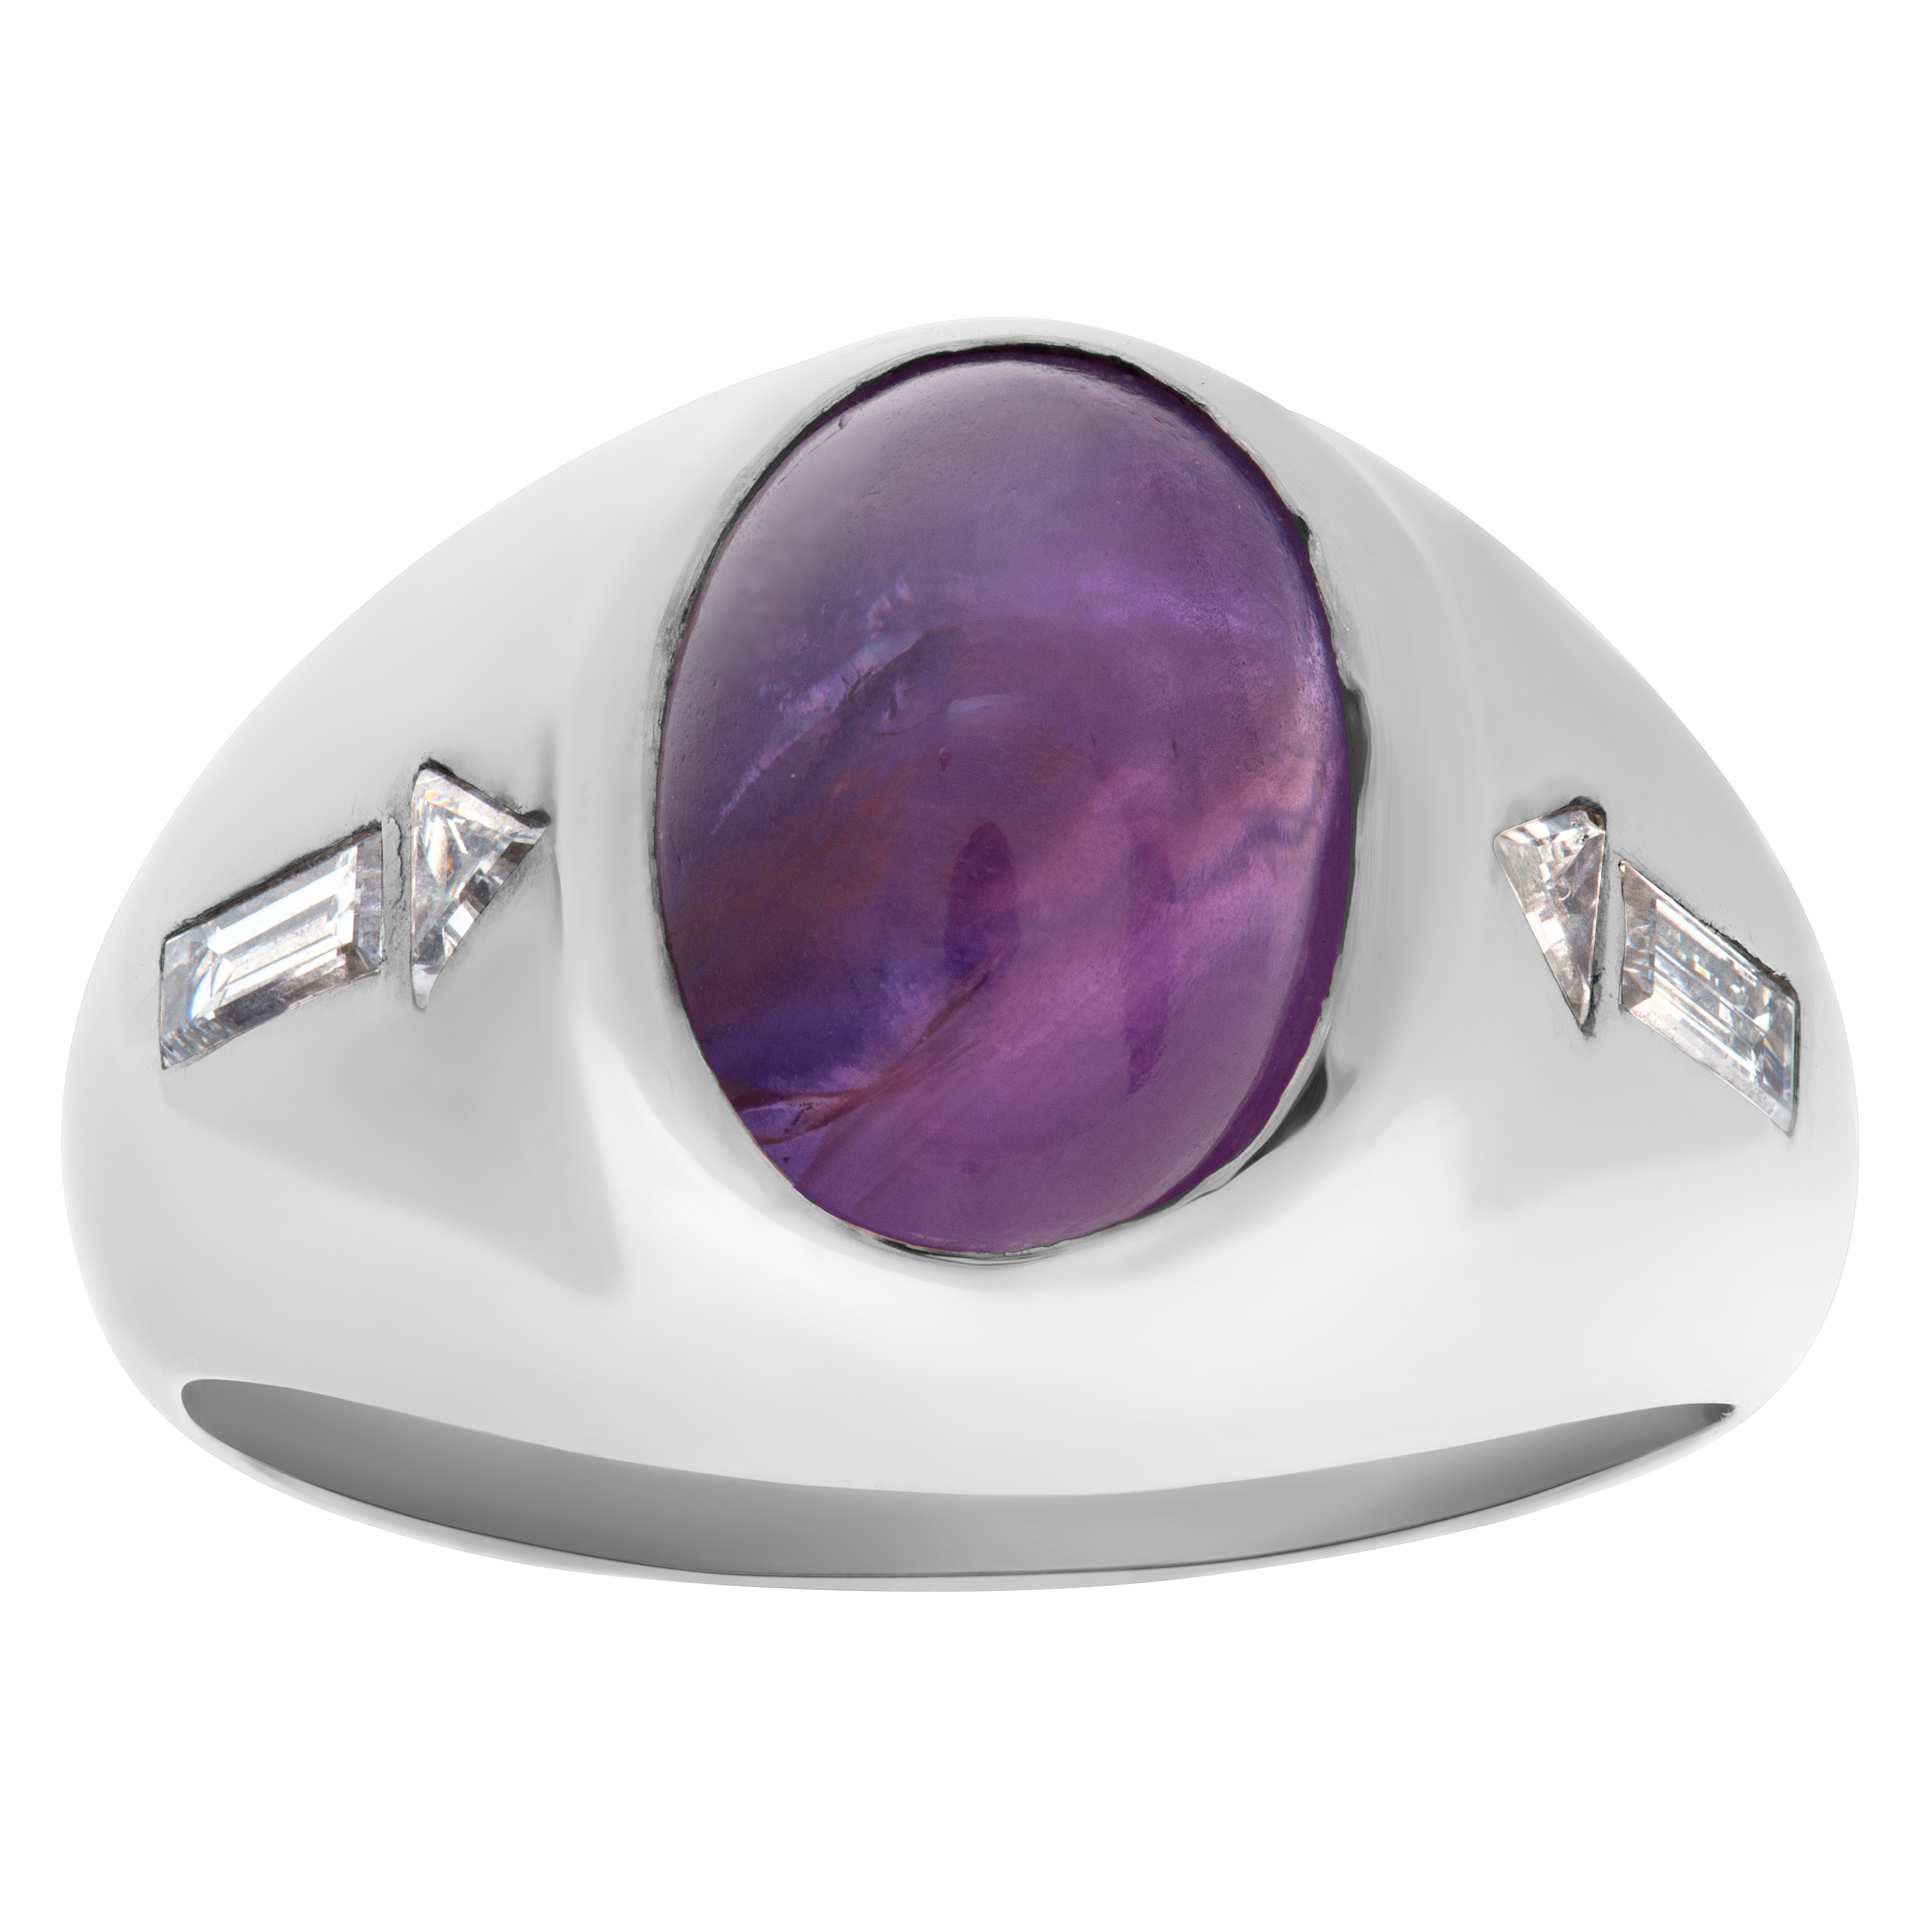 Star sapphire ring with diamond accents in 14k white gold. 2.00 cts sapphire cabochon